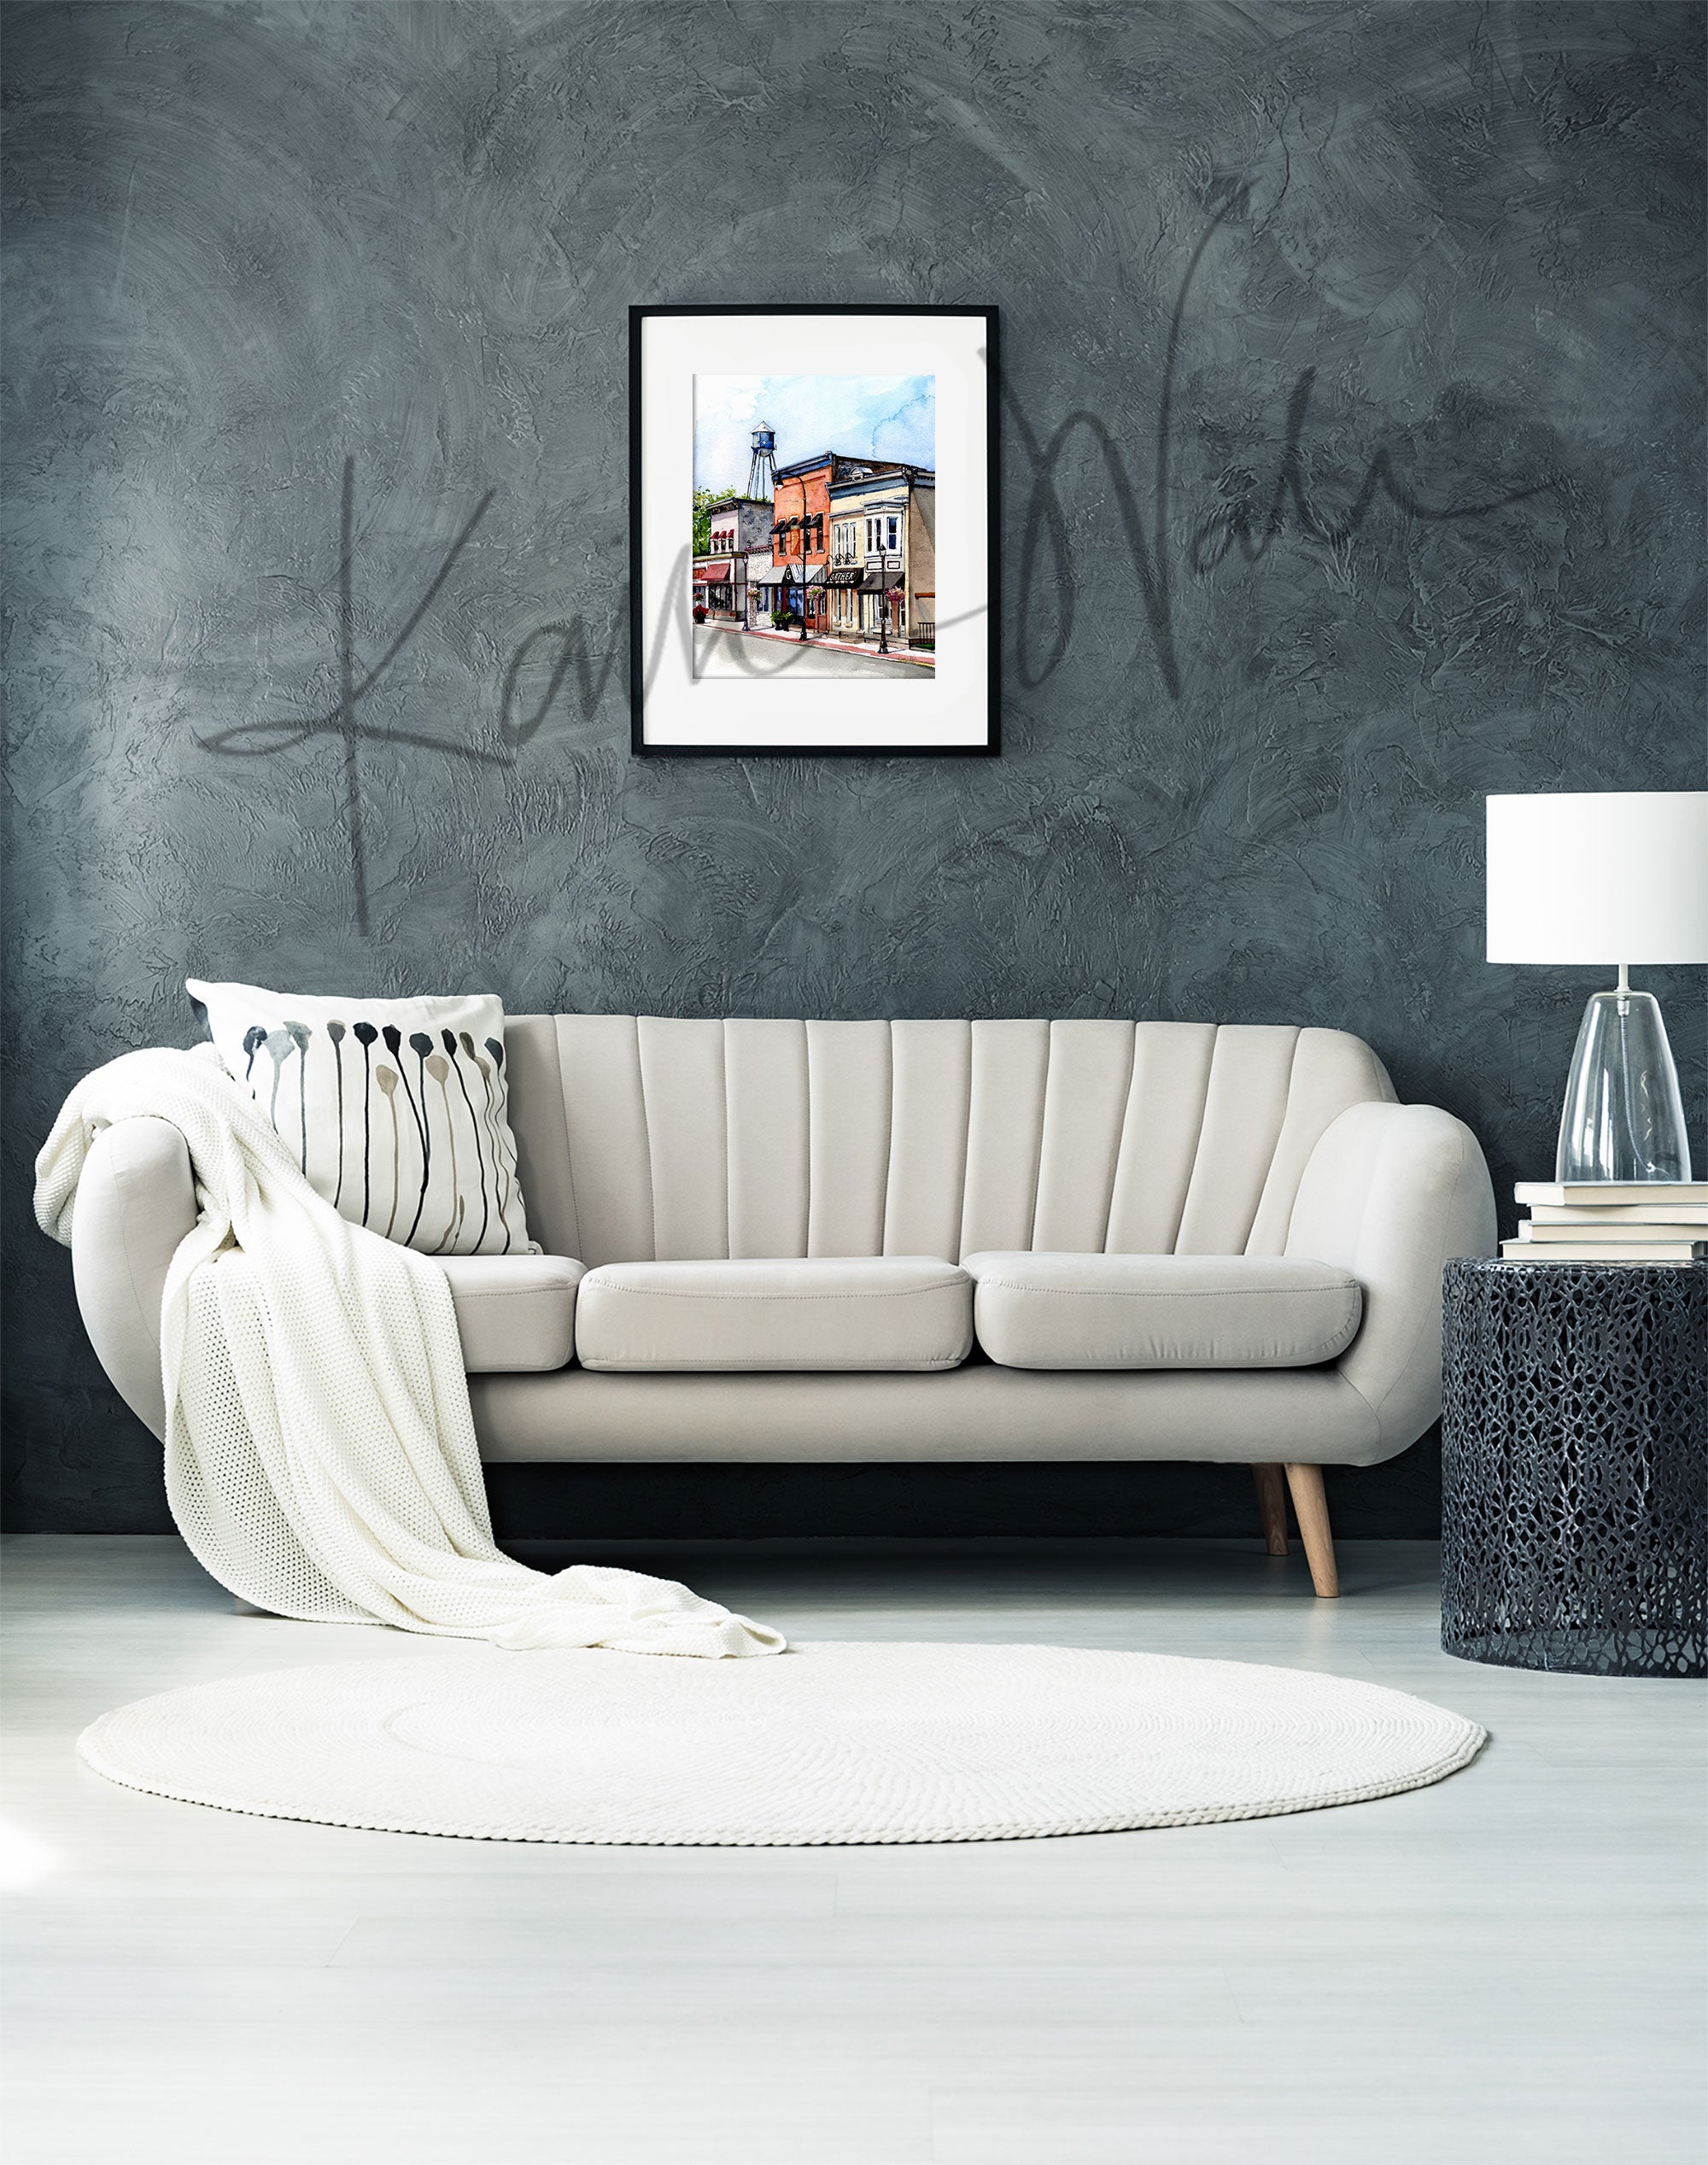 Framed watercolor painting of buildings on Main Street in Waunakee, Wisconsin. The painting is hanging over a white couch.